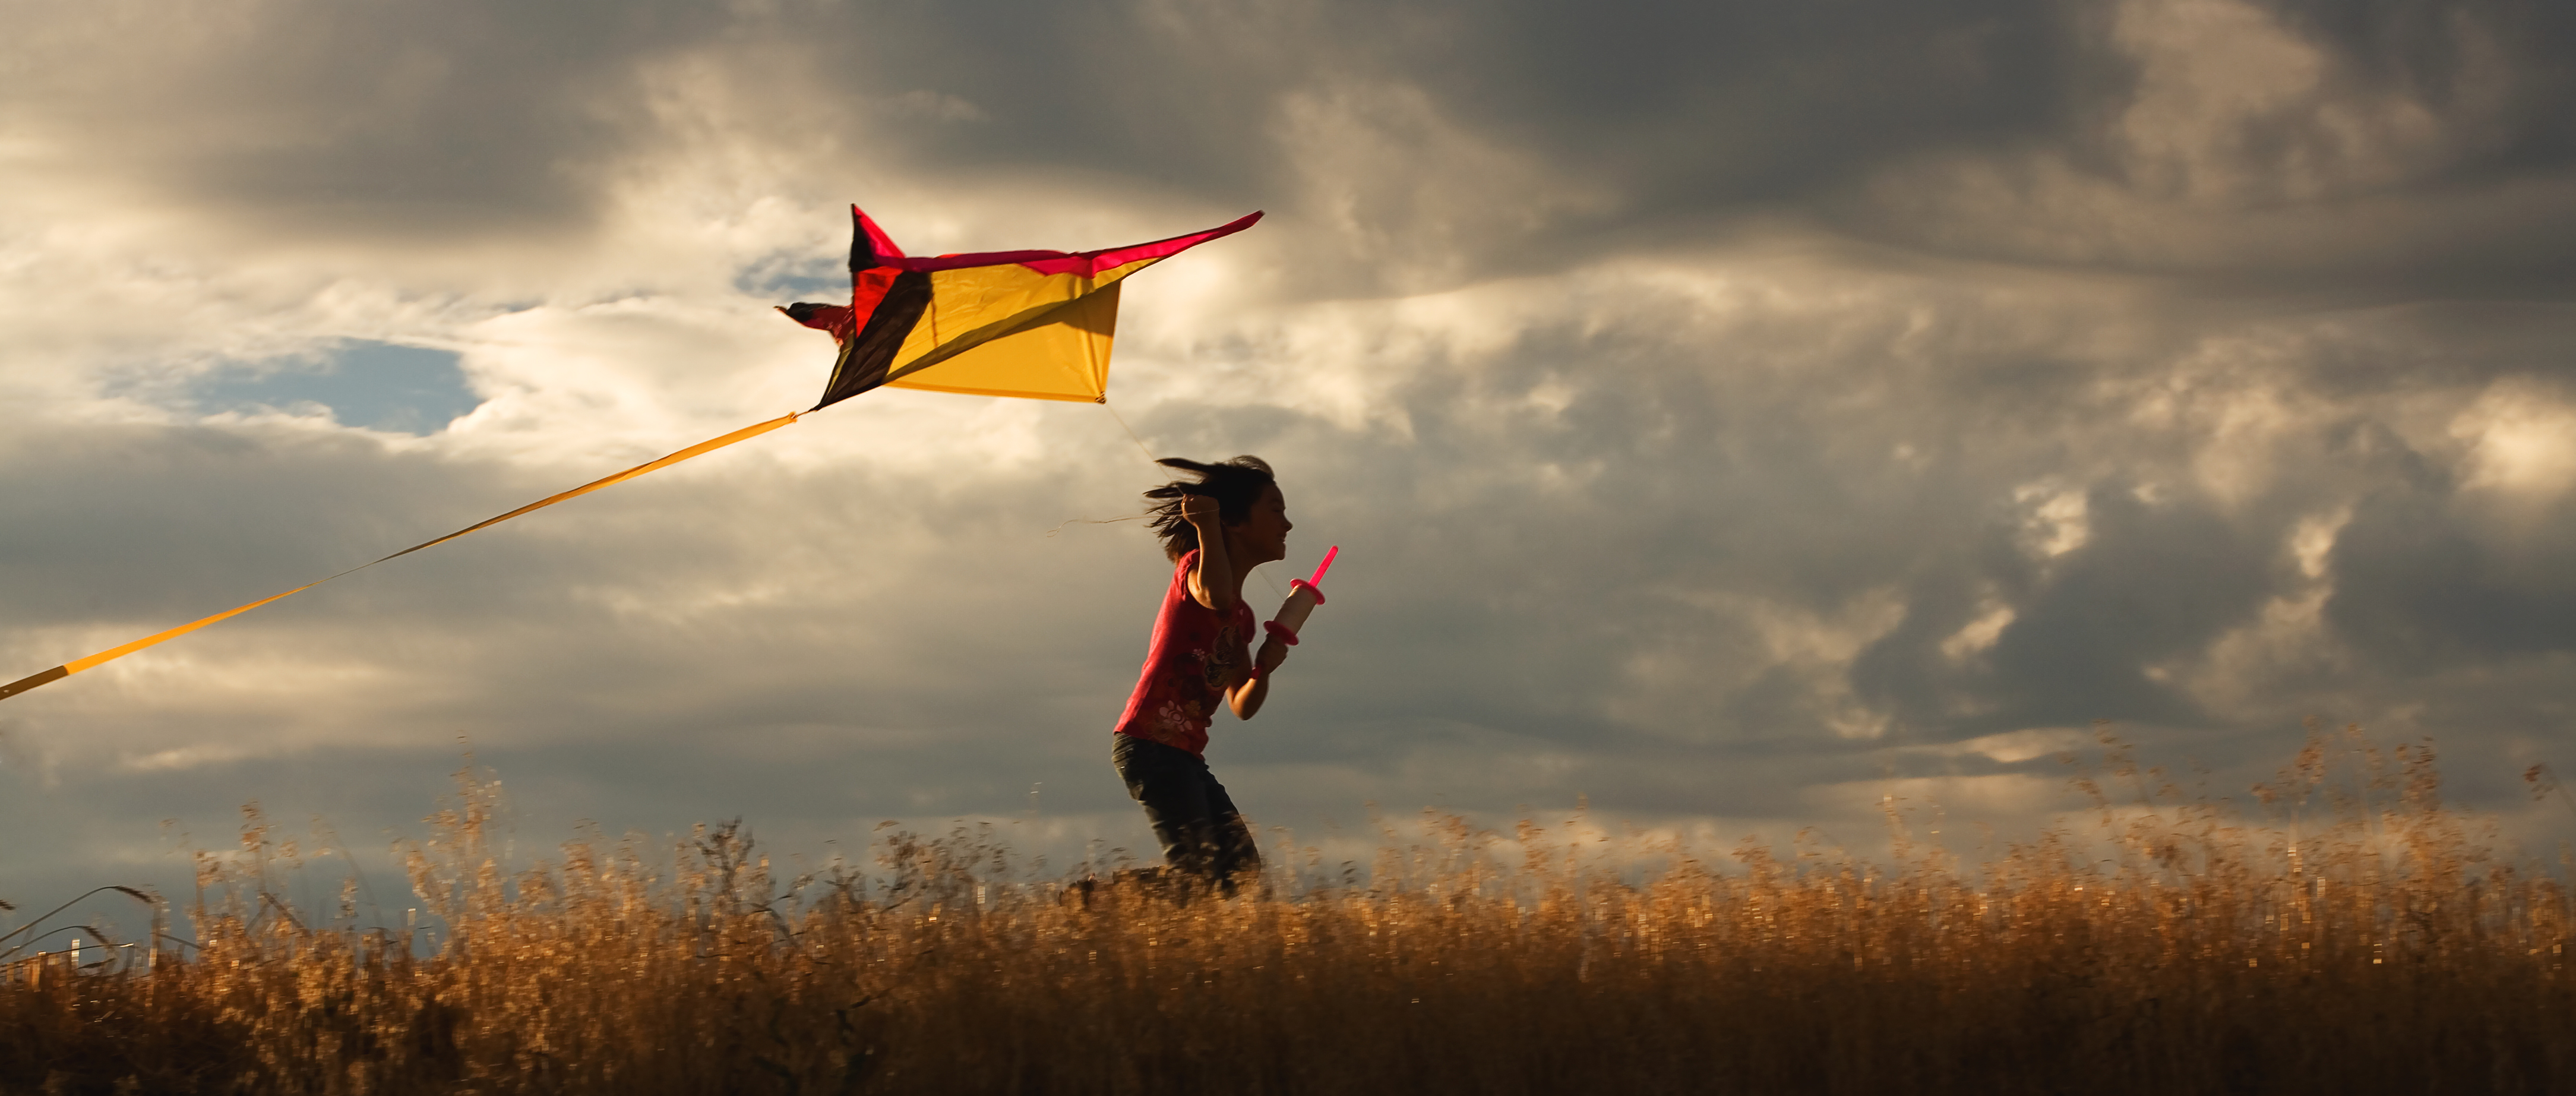 Kite Flying Day | Days Of The Year